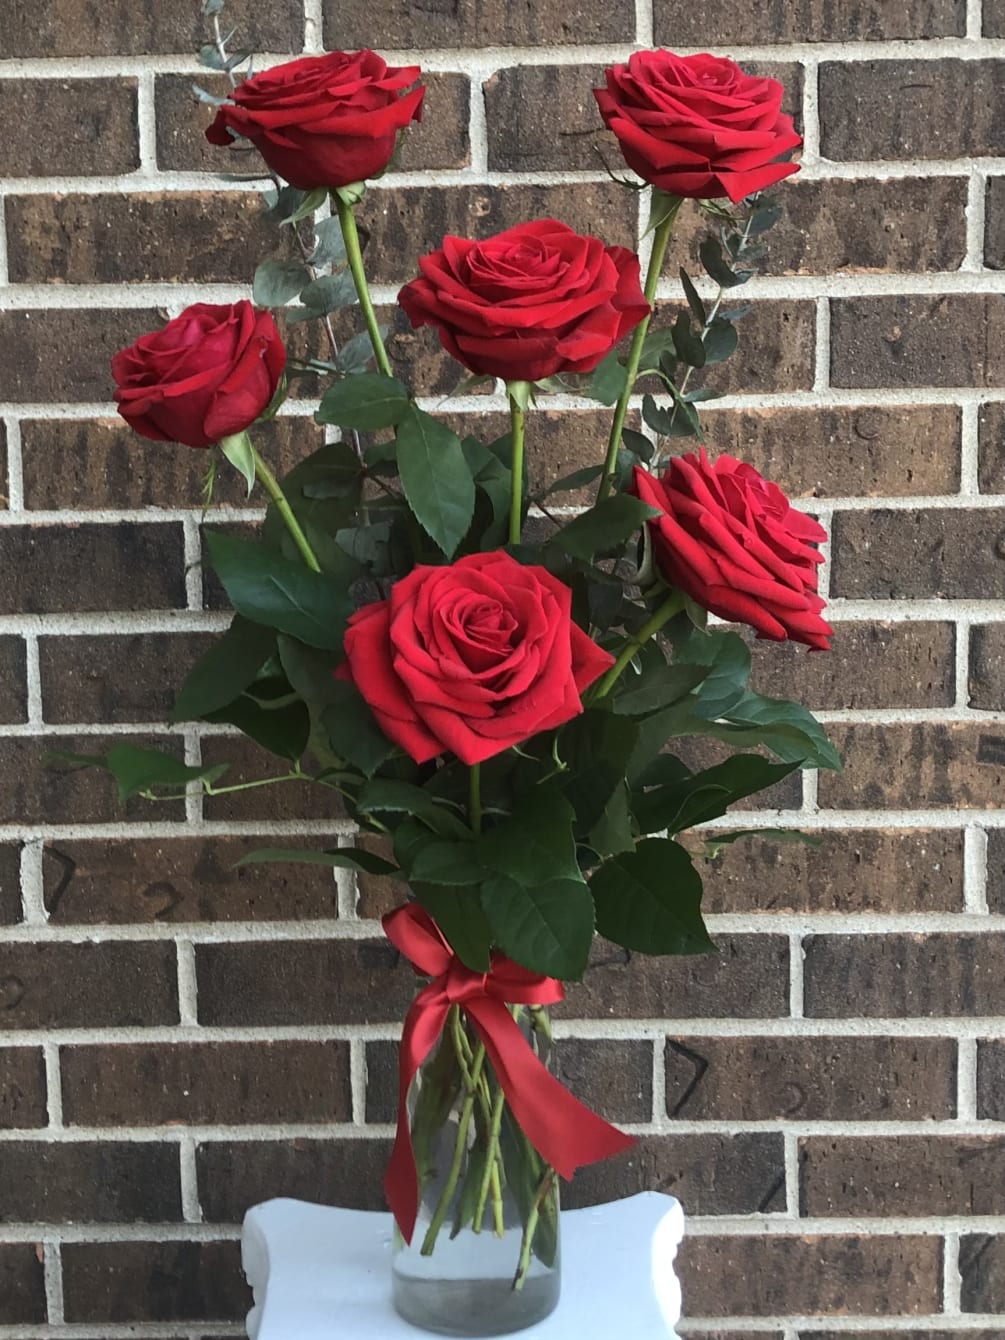 Six beautiful red roses in a vase with red ribbon.